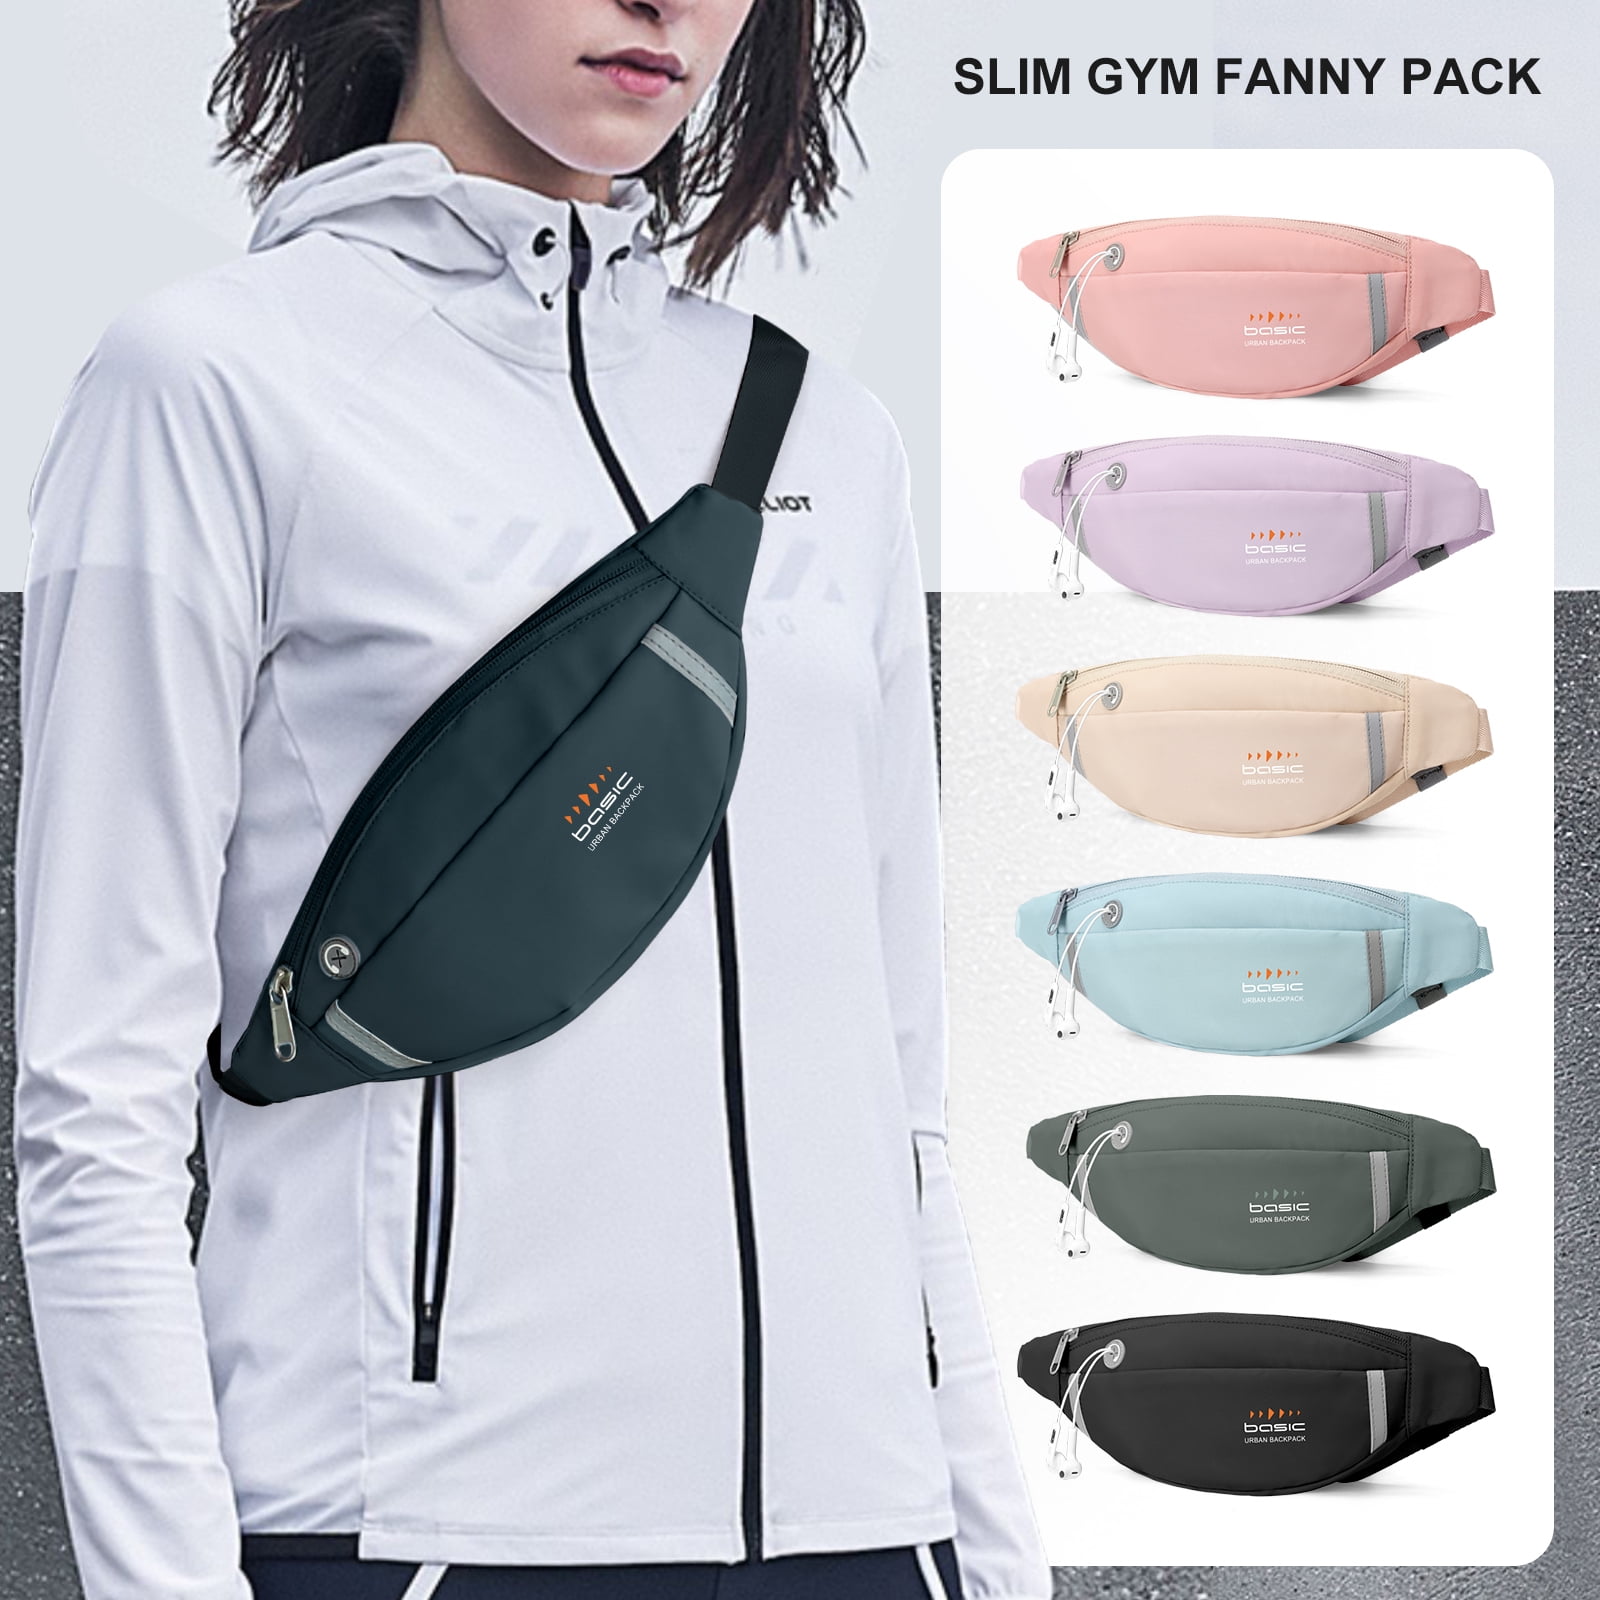 Belt Bags, Waist Bags And Fanny Packs for Women